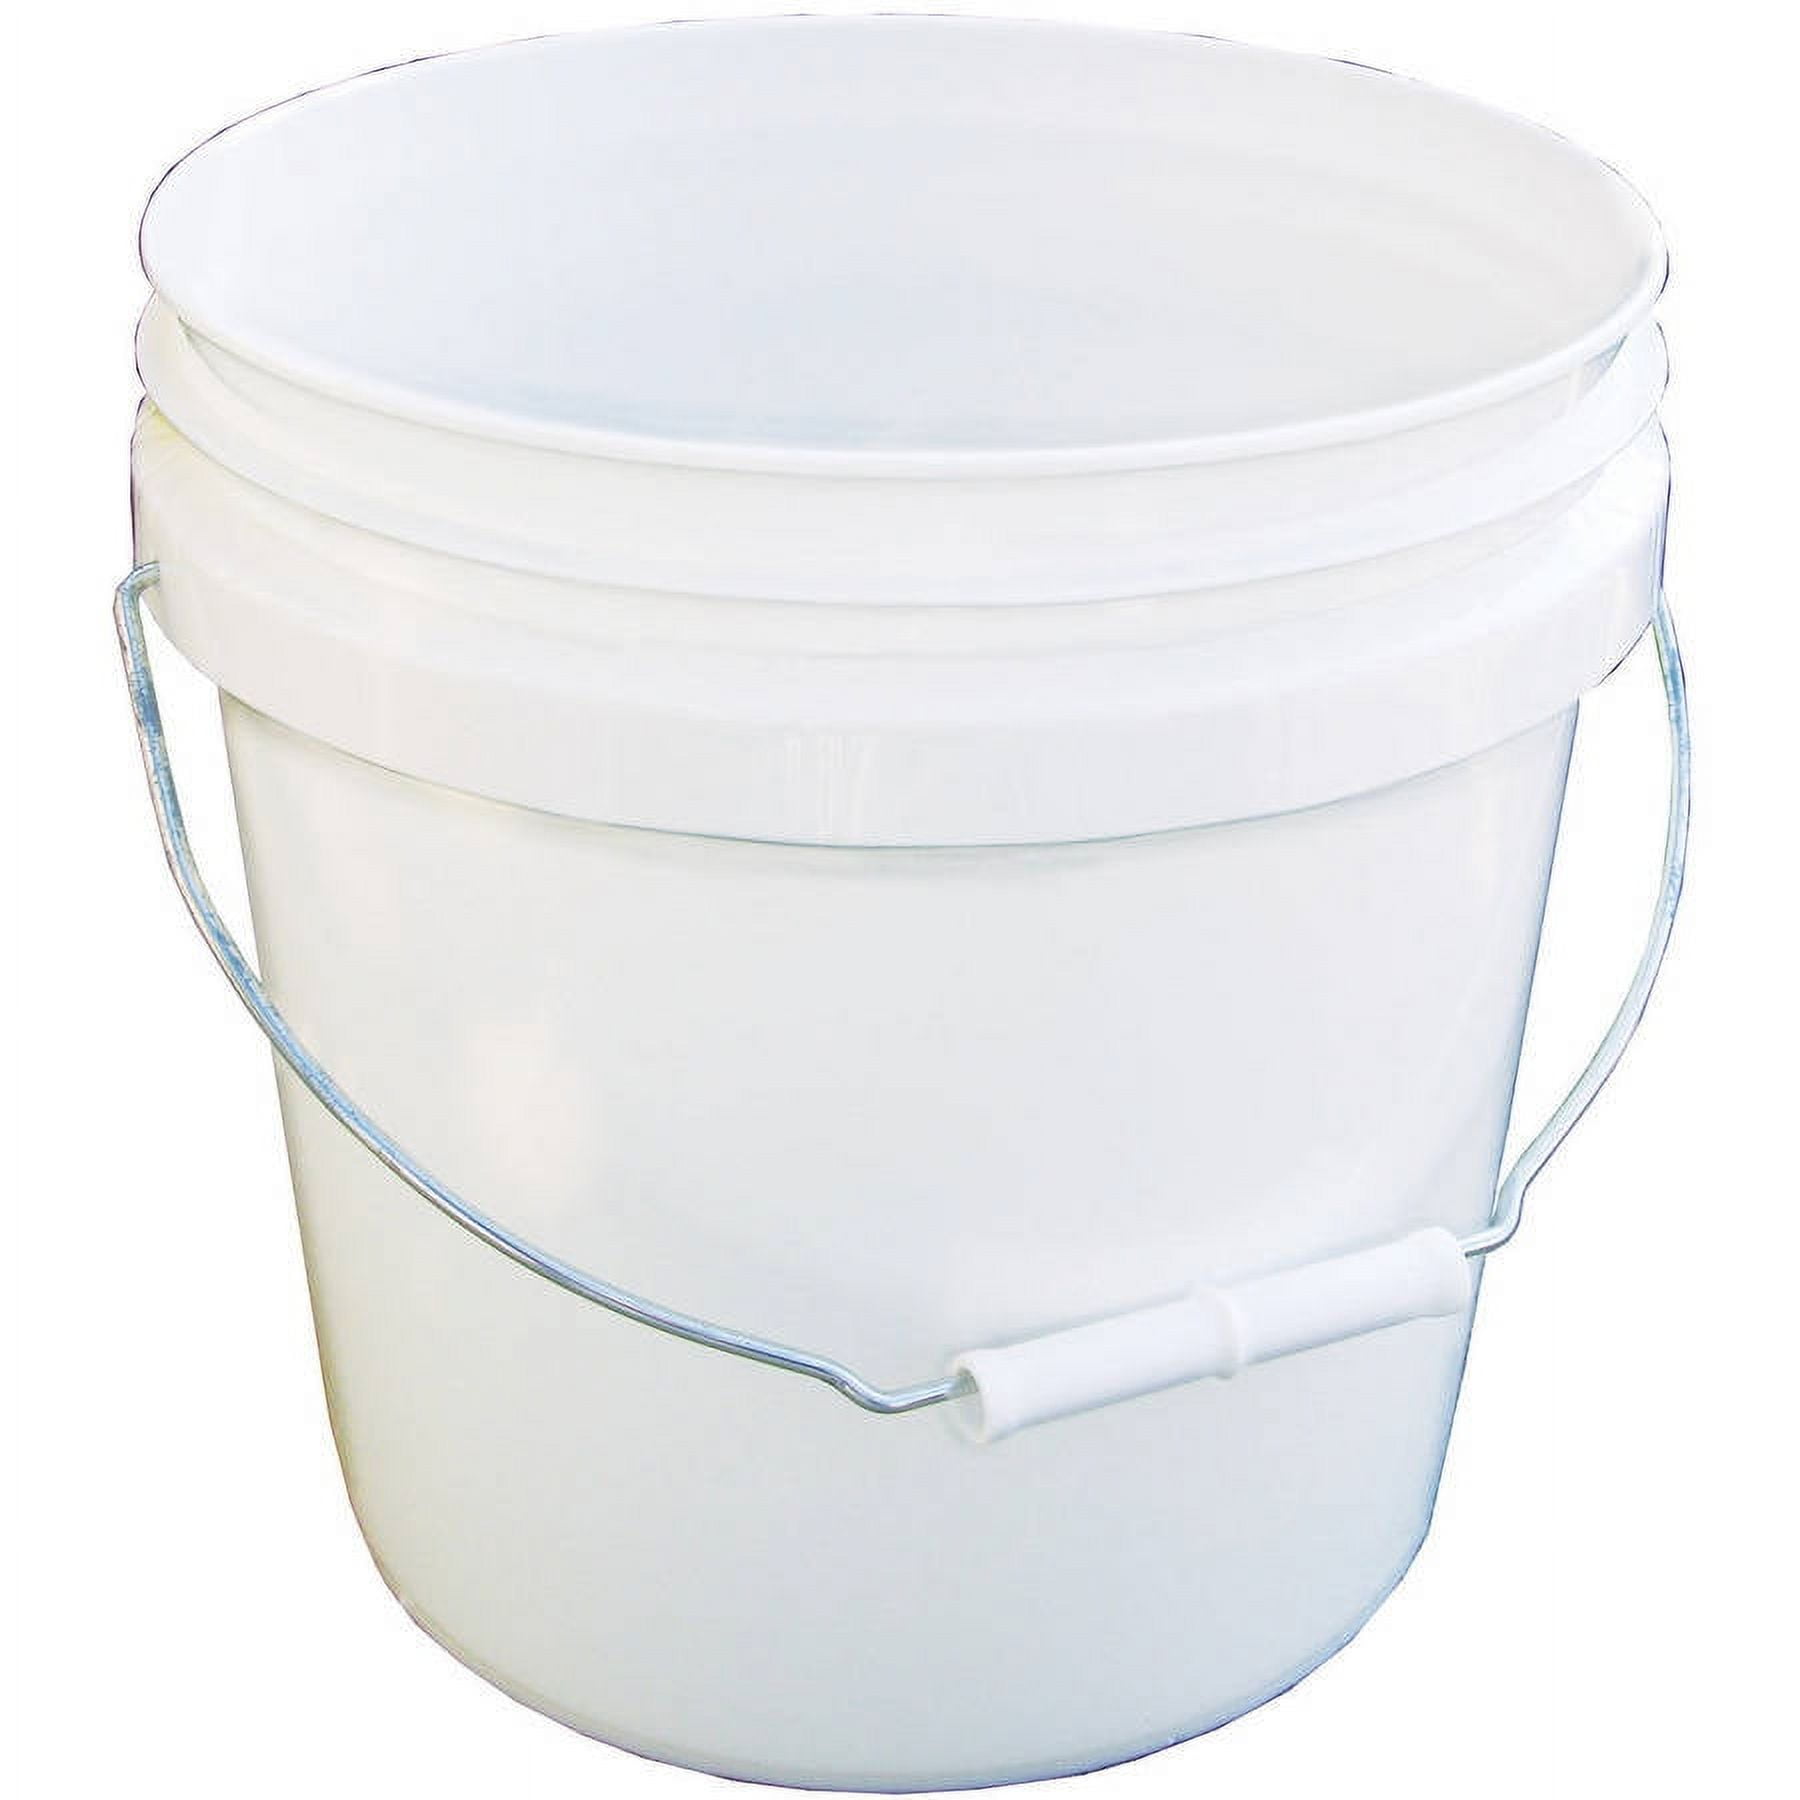 2.5 Gallon Multipurpose White Plastic Bucket Pail (NO LIDS) Food Grade BPA  Free 11 Liter Capacity Durable for Commercial Industrial Use (25)